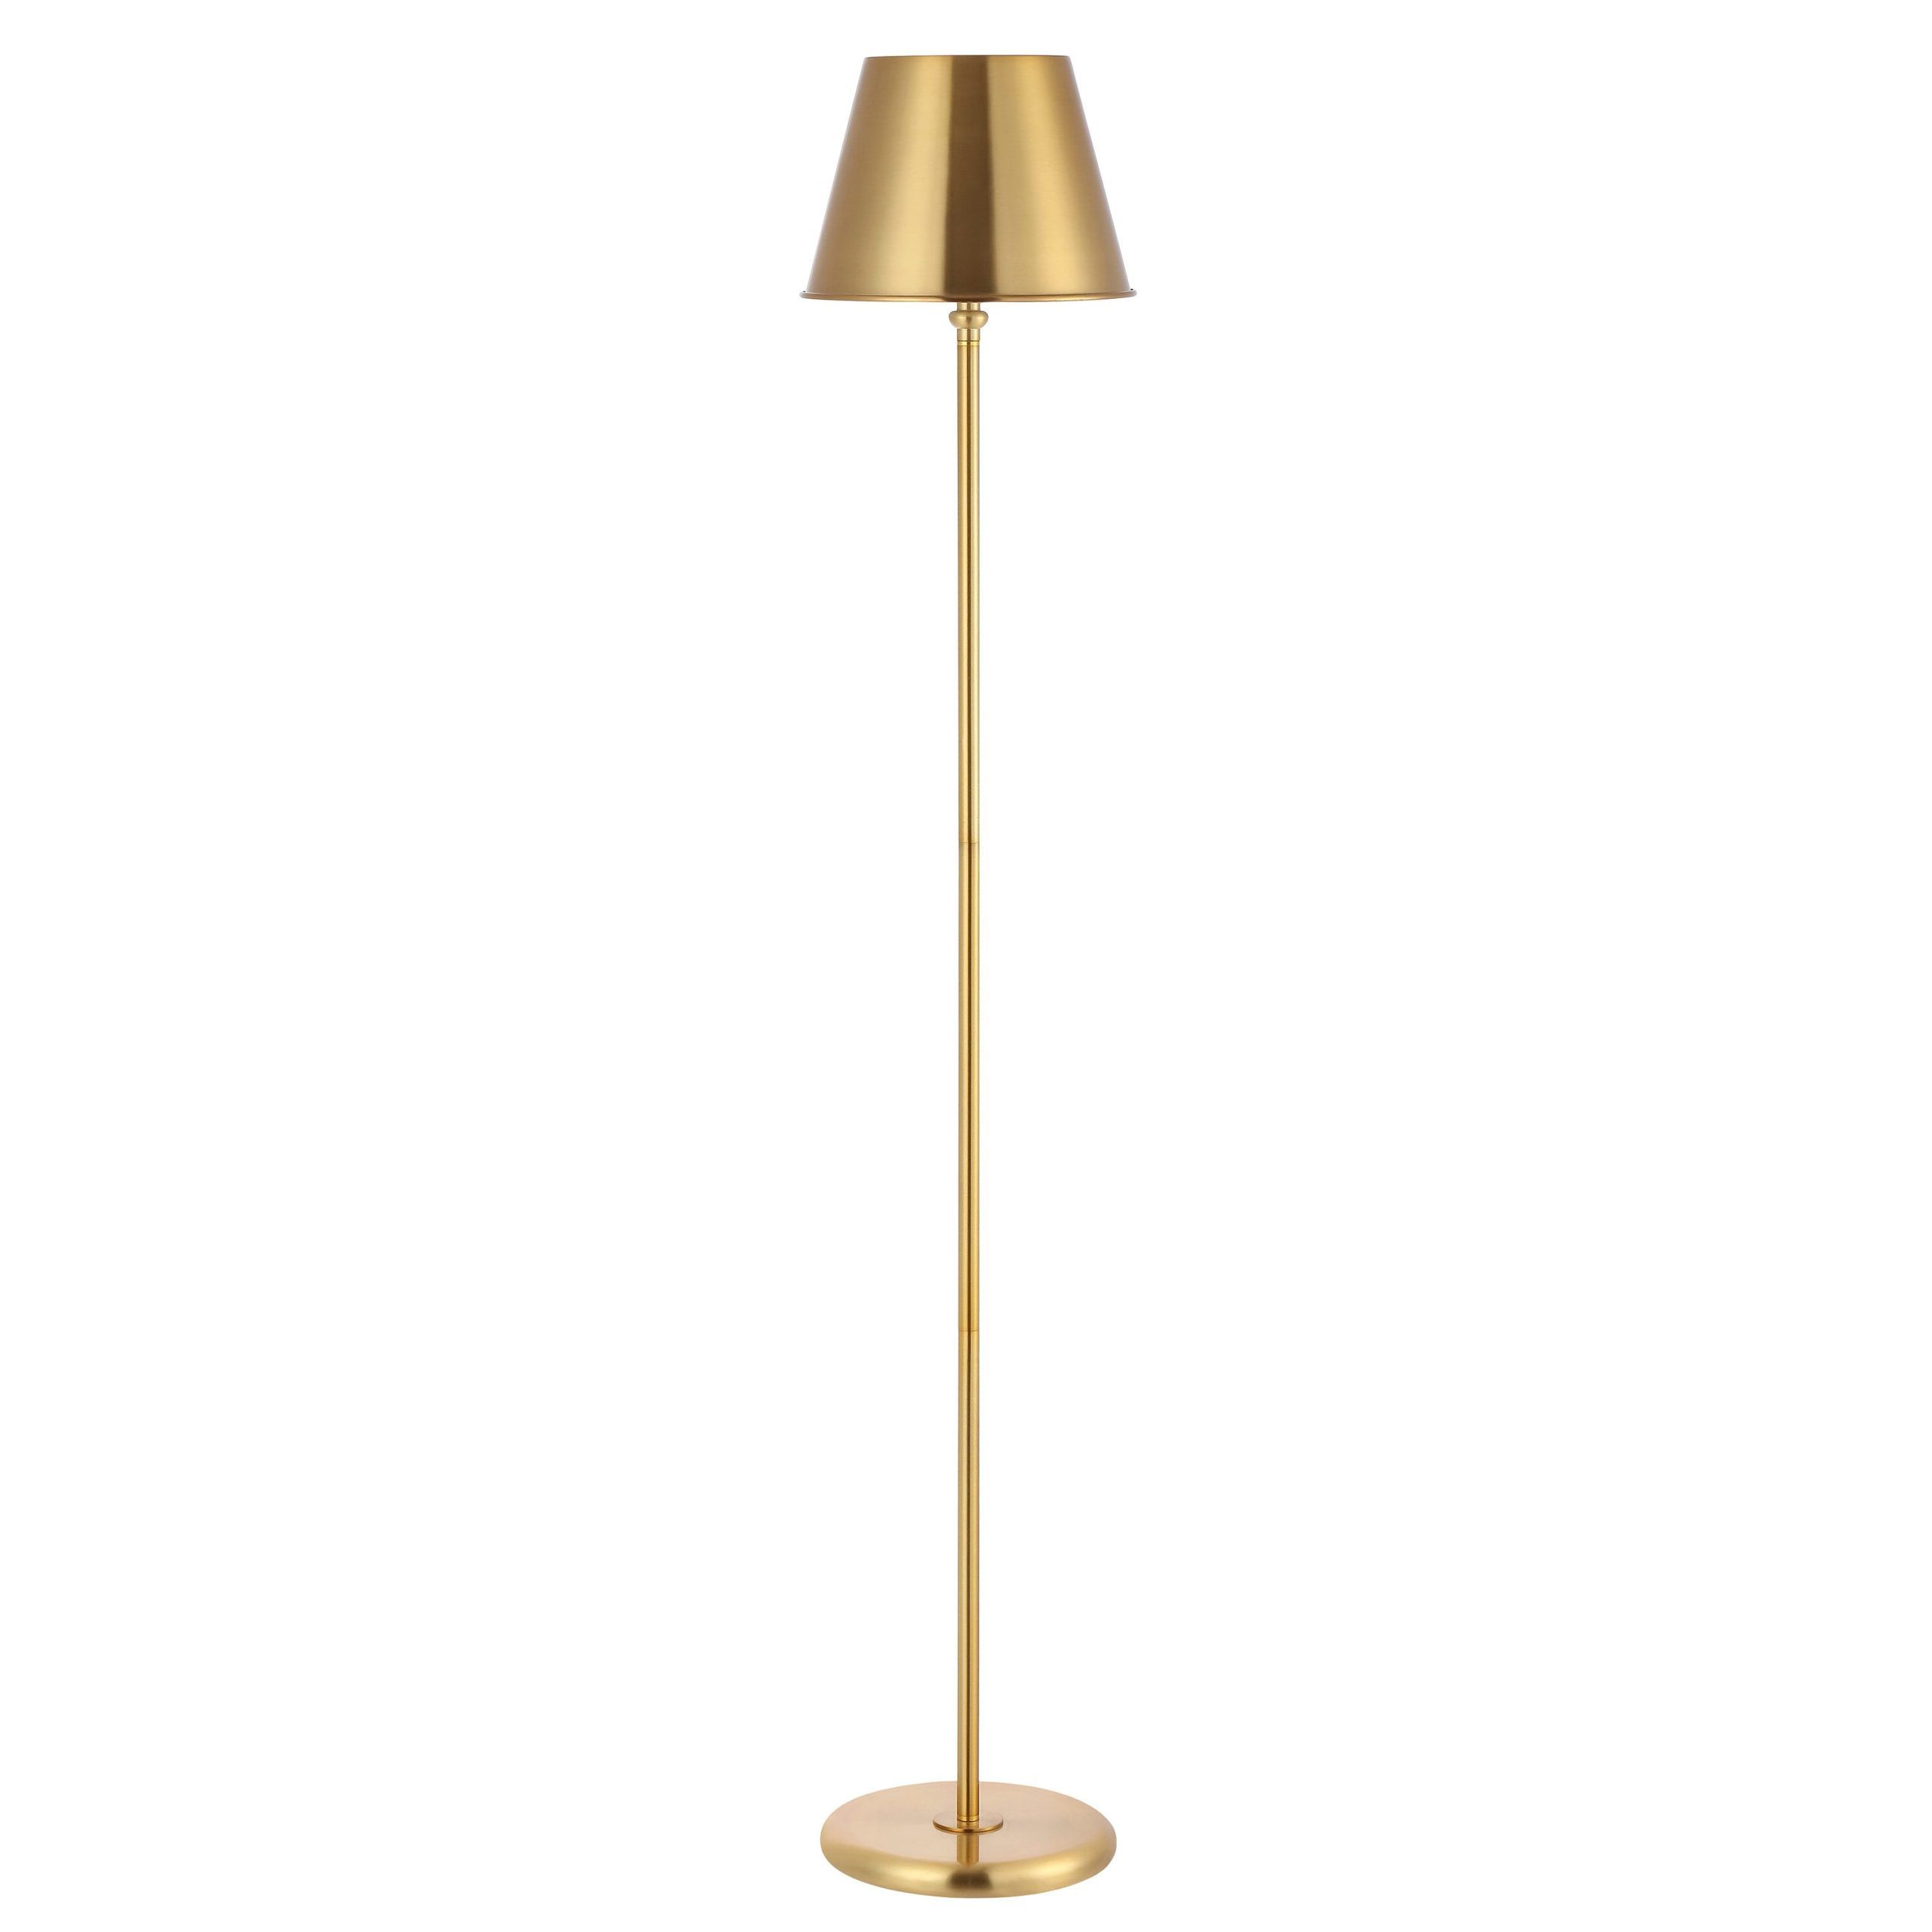 Gold Floor Lamps Regarding Most Current Safavieh Asher 60 In Brass Shaded Floor Lamp In The Floor Lamps Department  At Lowes (View 5 of 15)